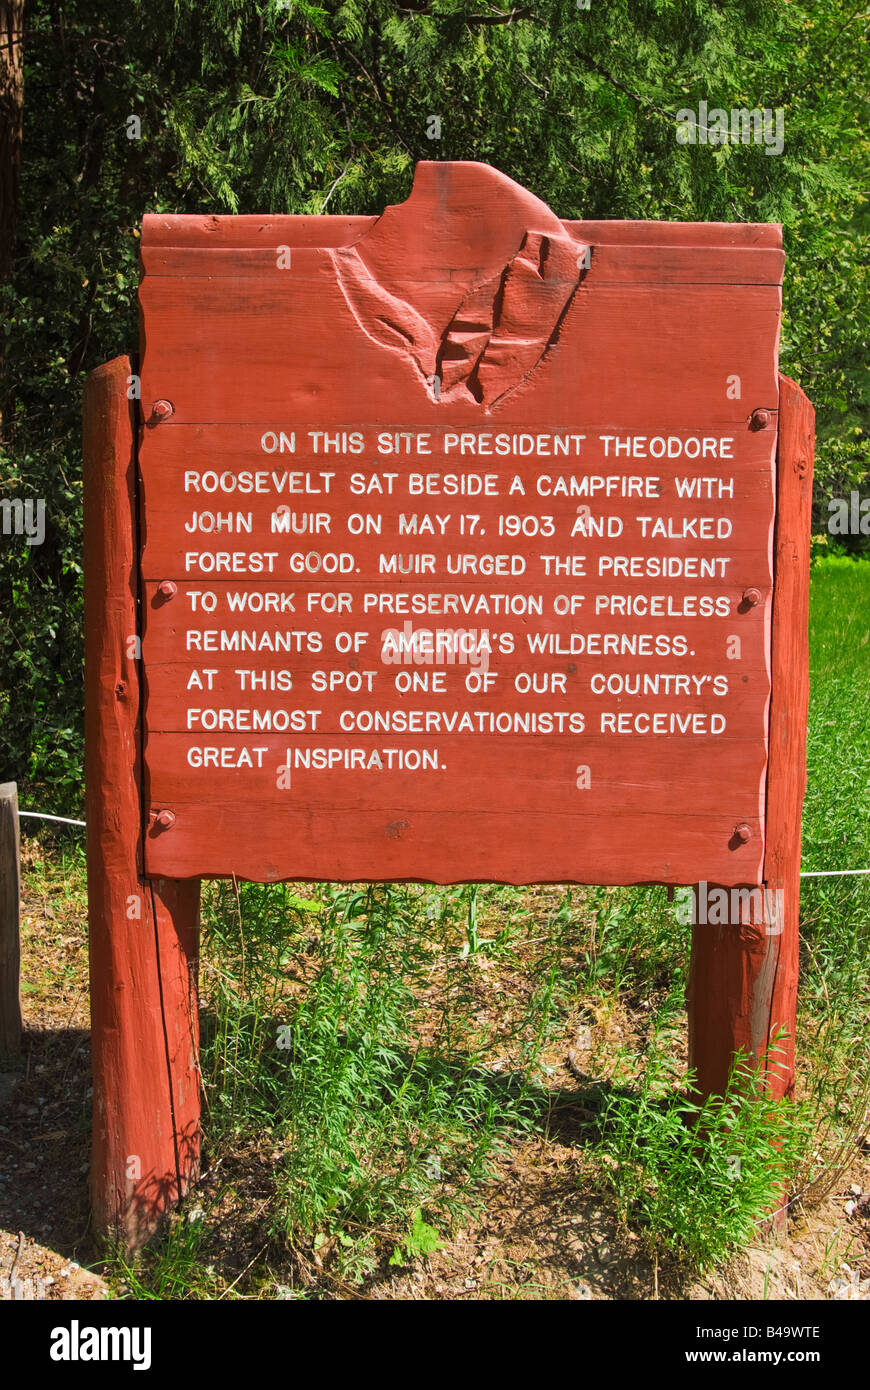 Interpretive sign at the meadow where John Muir and Teddy Roosevelt discussed conservation Yosemite National Park California Stock Photo